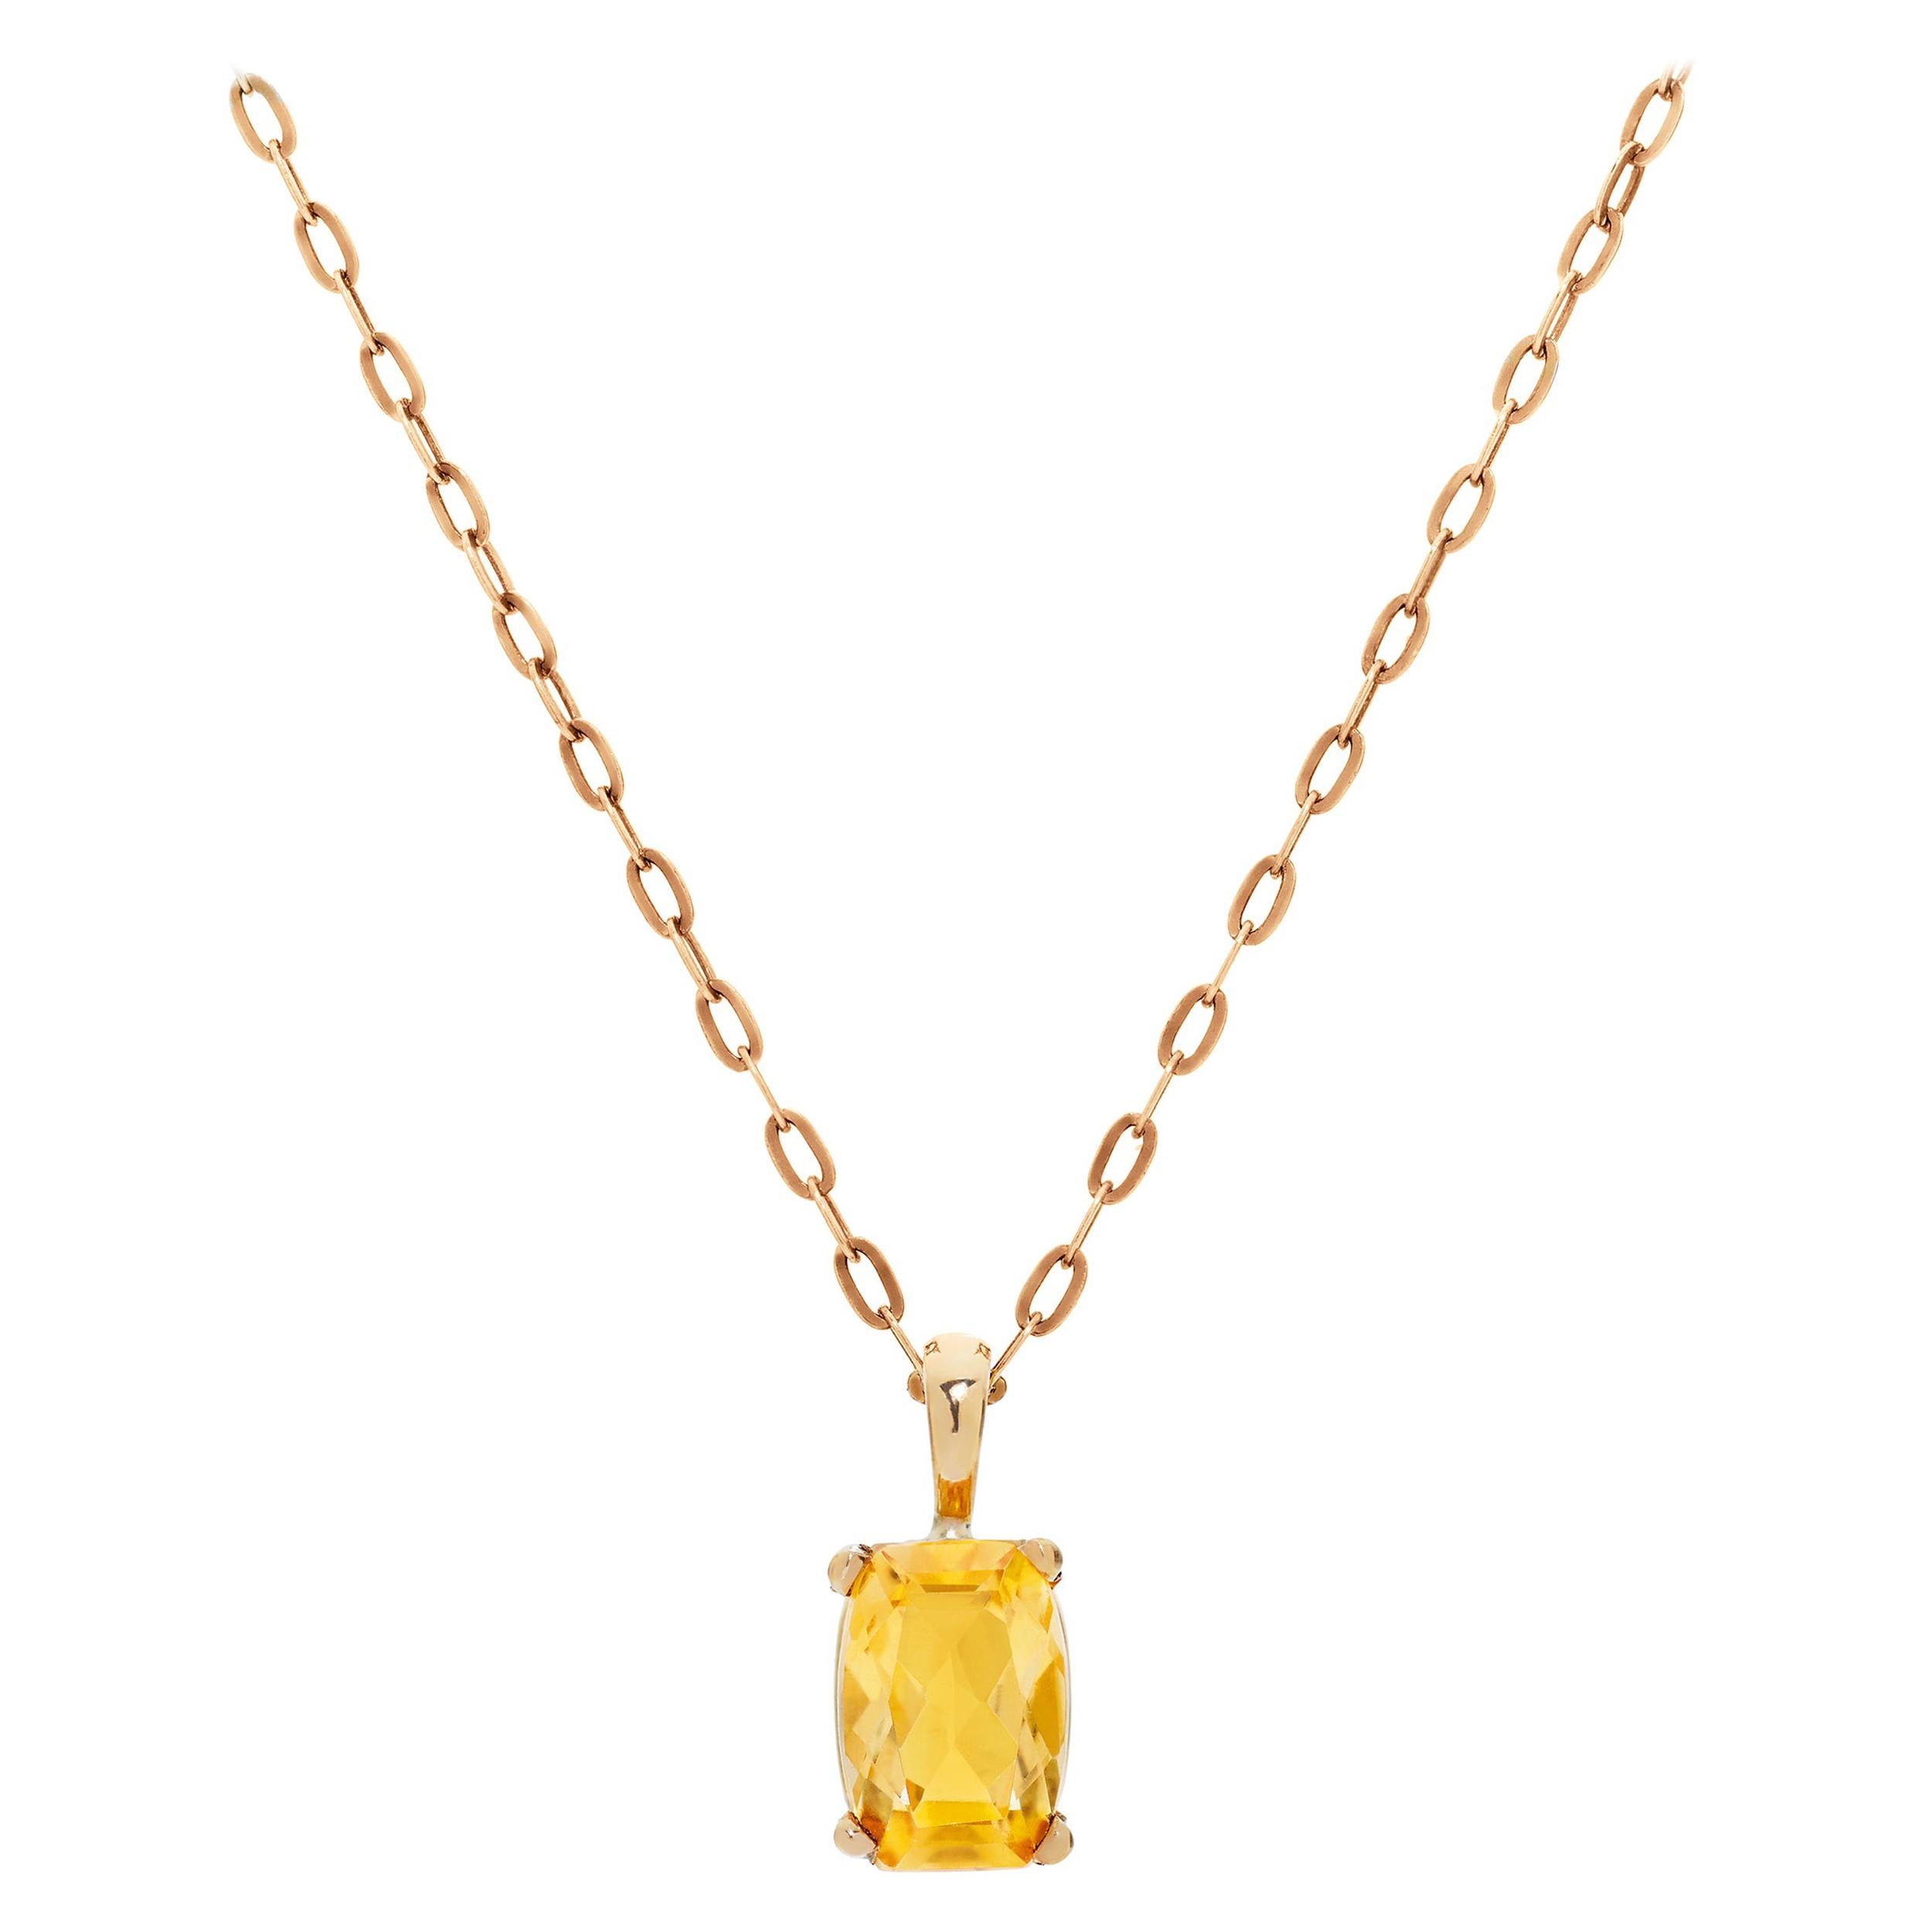 A precious matching necklace and earring set with a total of 2.26 Carats of Cushion Cut Citrine set in 18 Karat Yellow Gold.  The pendant hangs on an 18